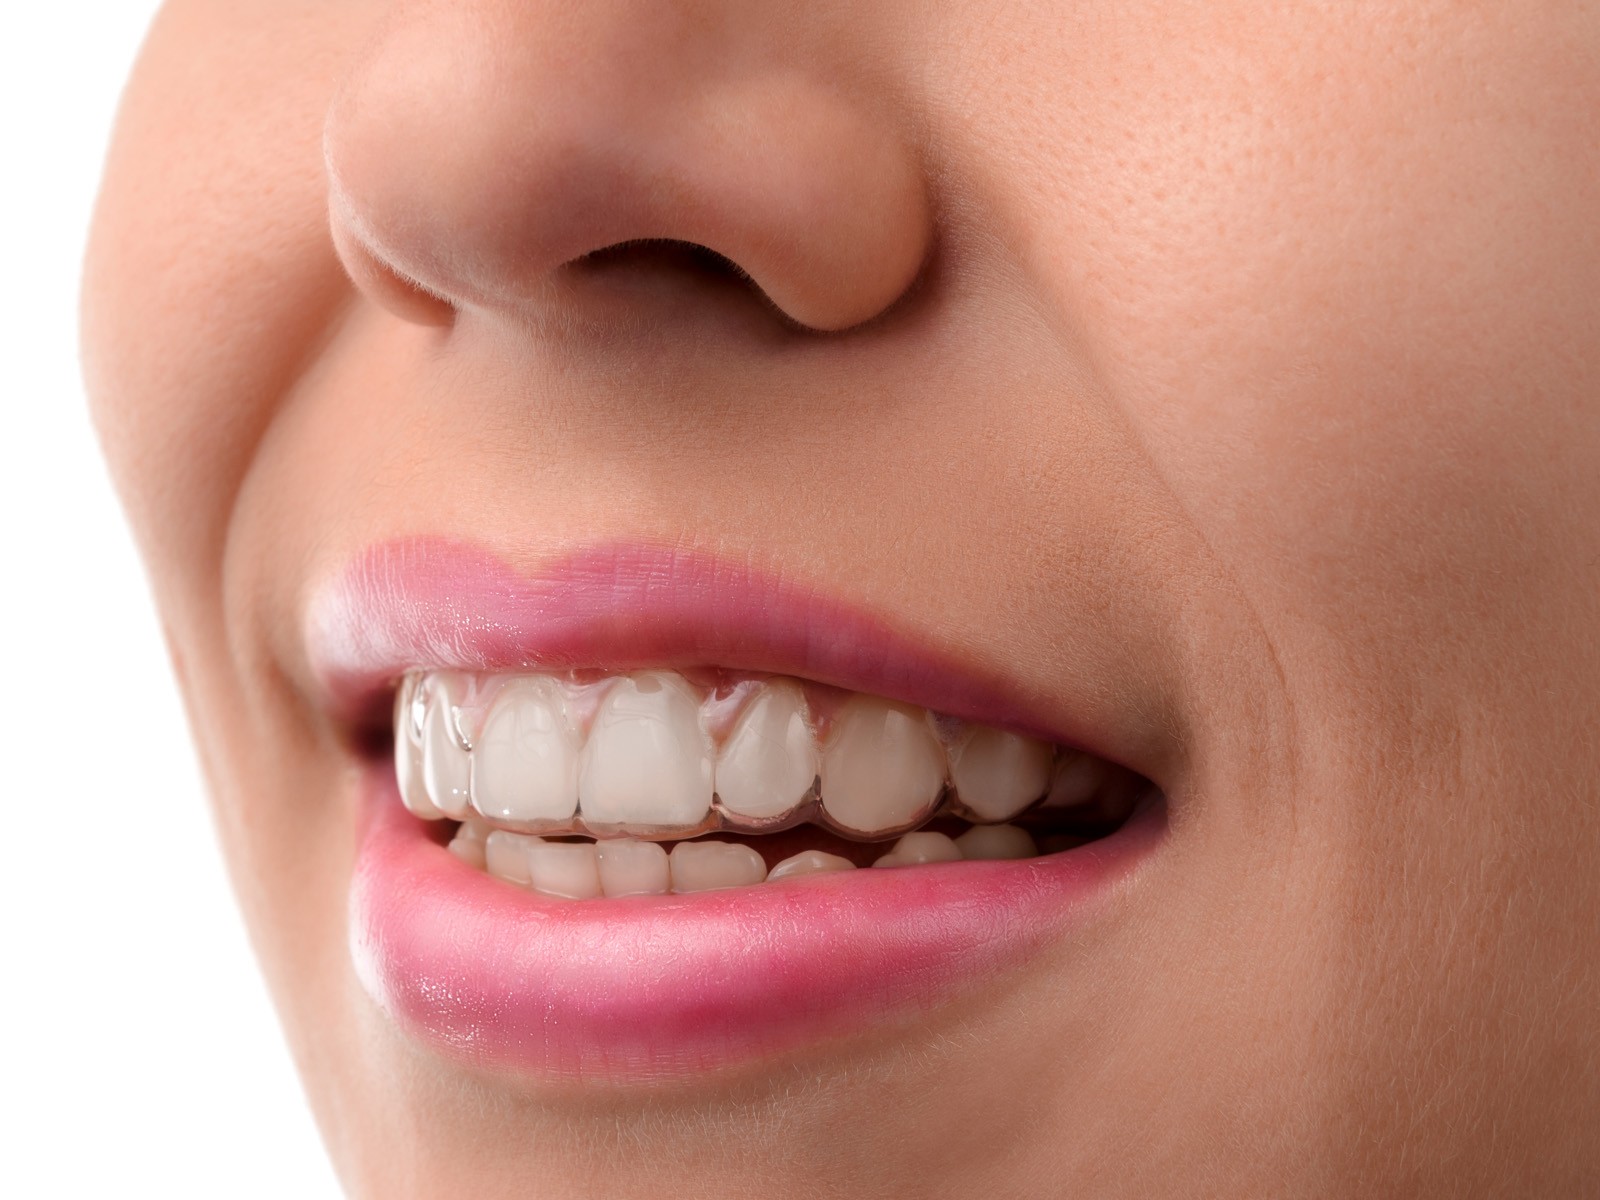 Does Invisalign make your lips bigger?